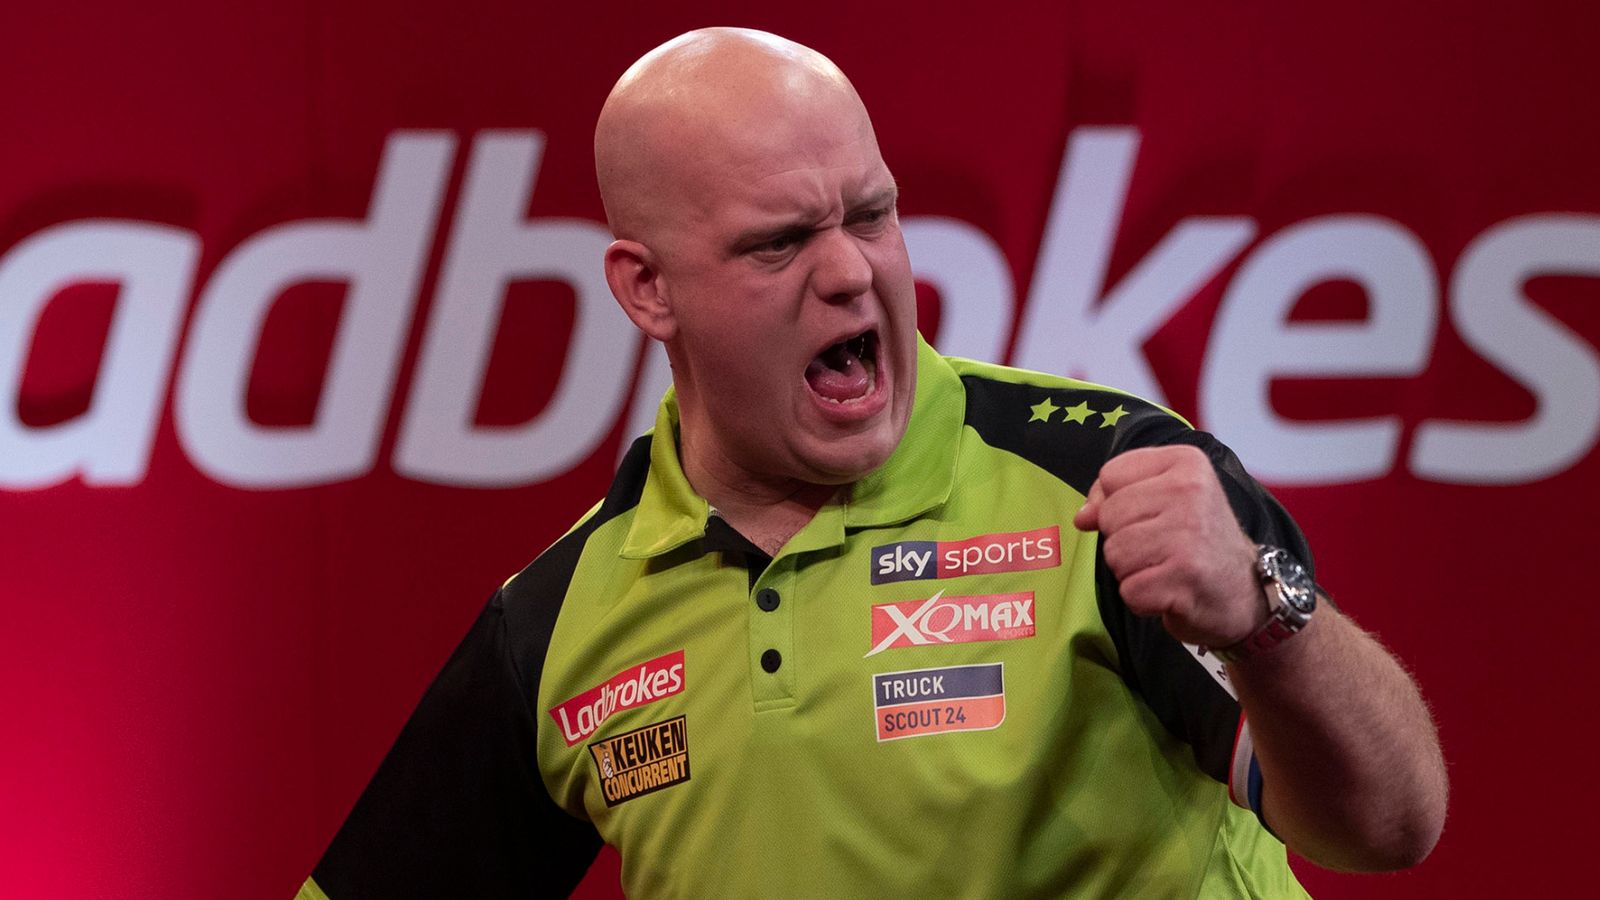 2020 preview: Darts returns with a bang in Milton Keynes | Darts News | Sky Sports